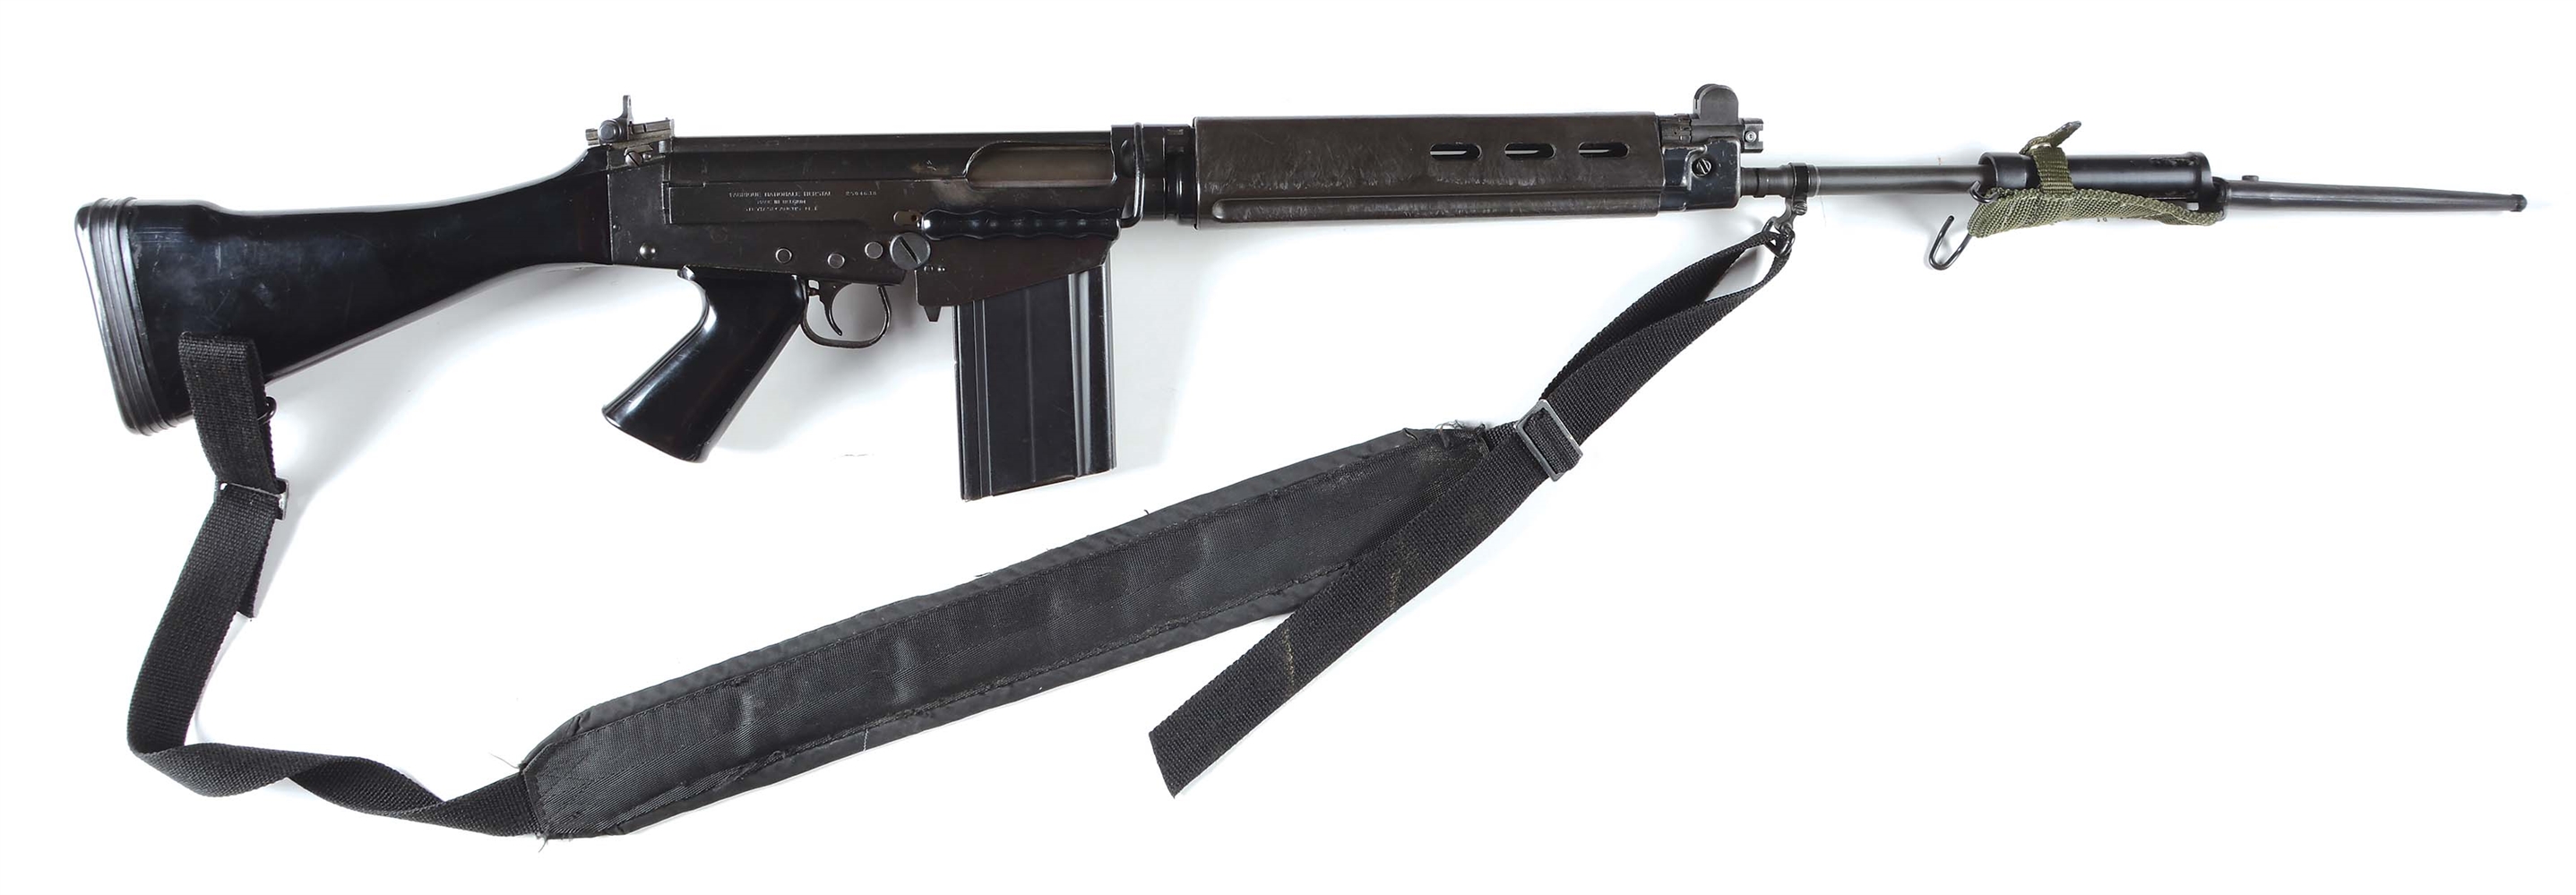 (M) FABRIQUE NATIONALE FAL 50.00 MATCH .308 SEMI-AUTOMATIC RIFLE WITH BAYONET.